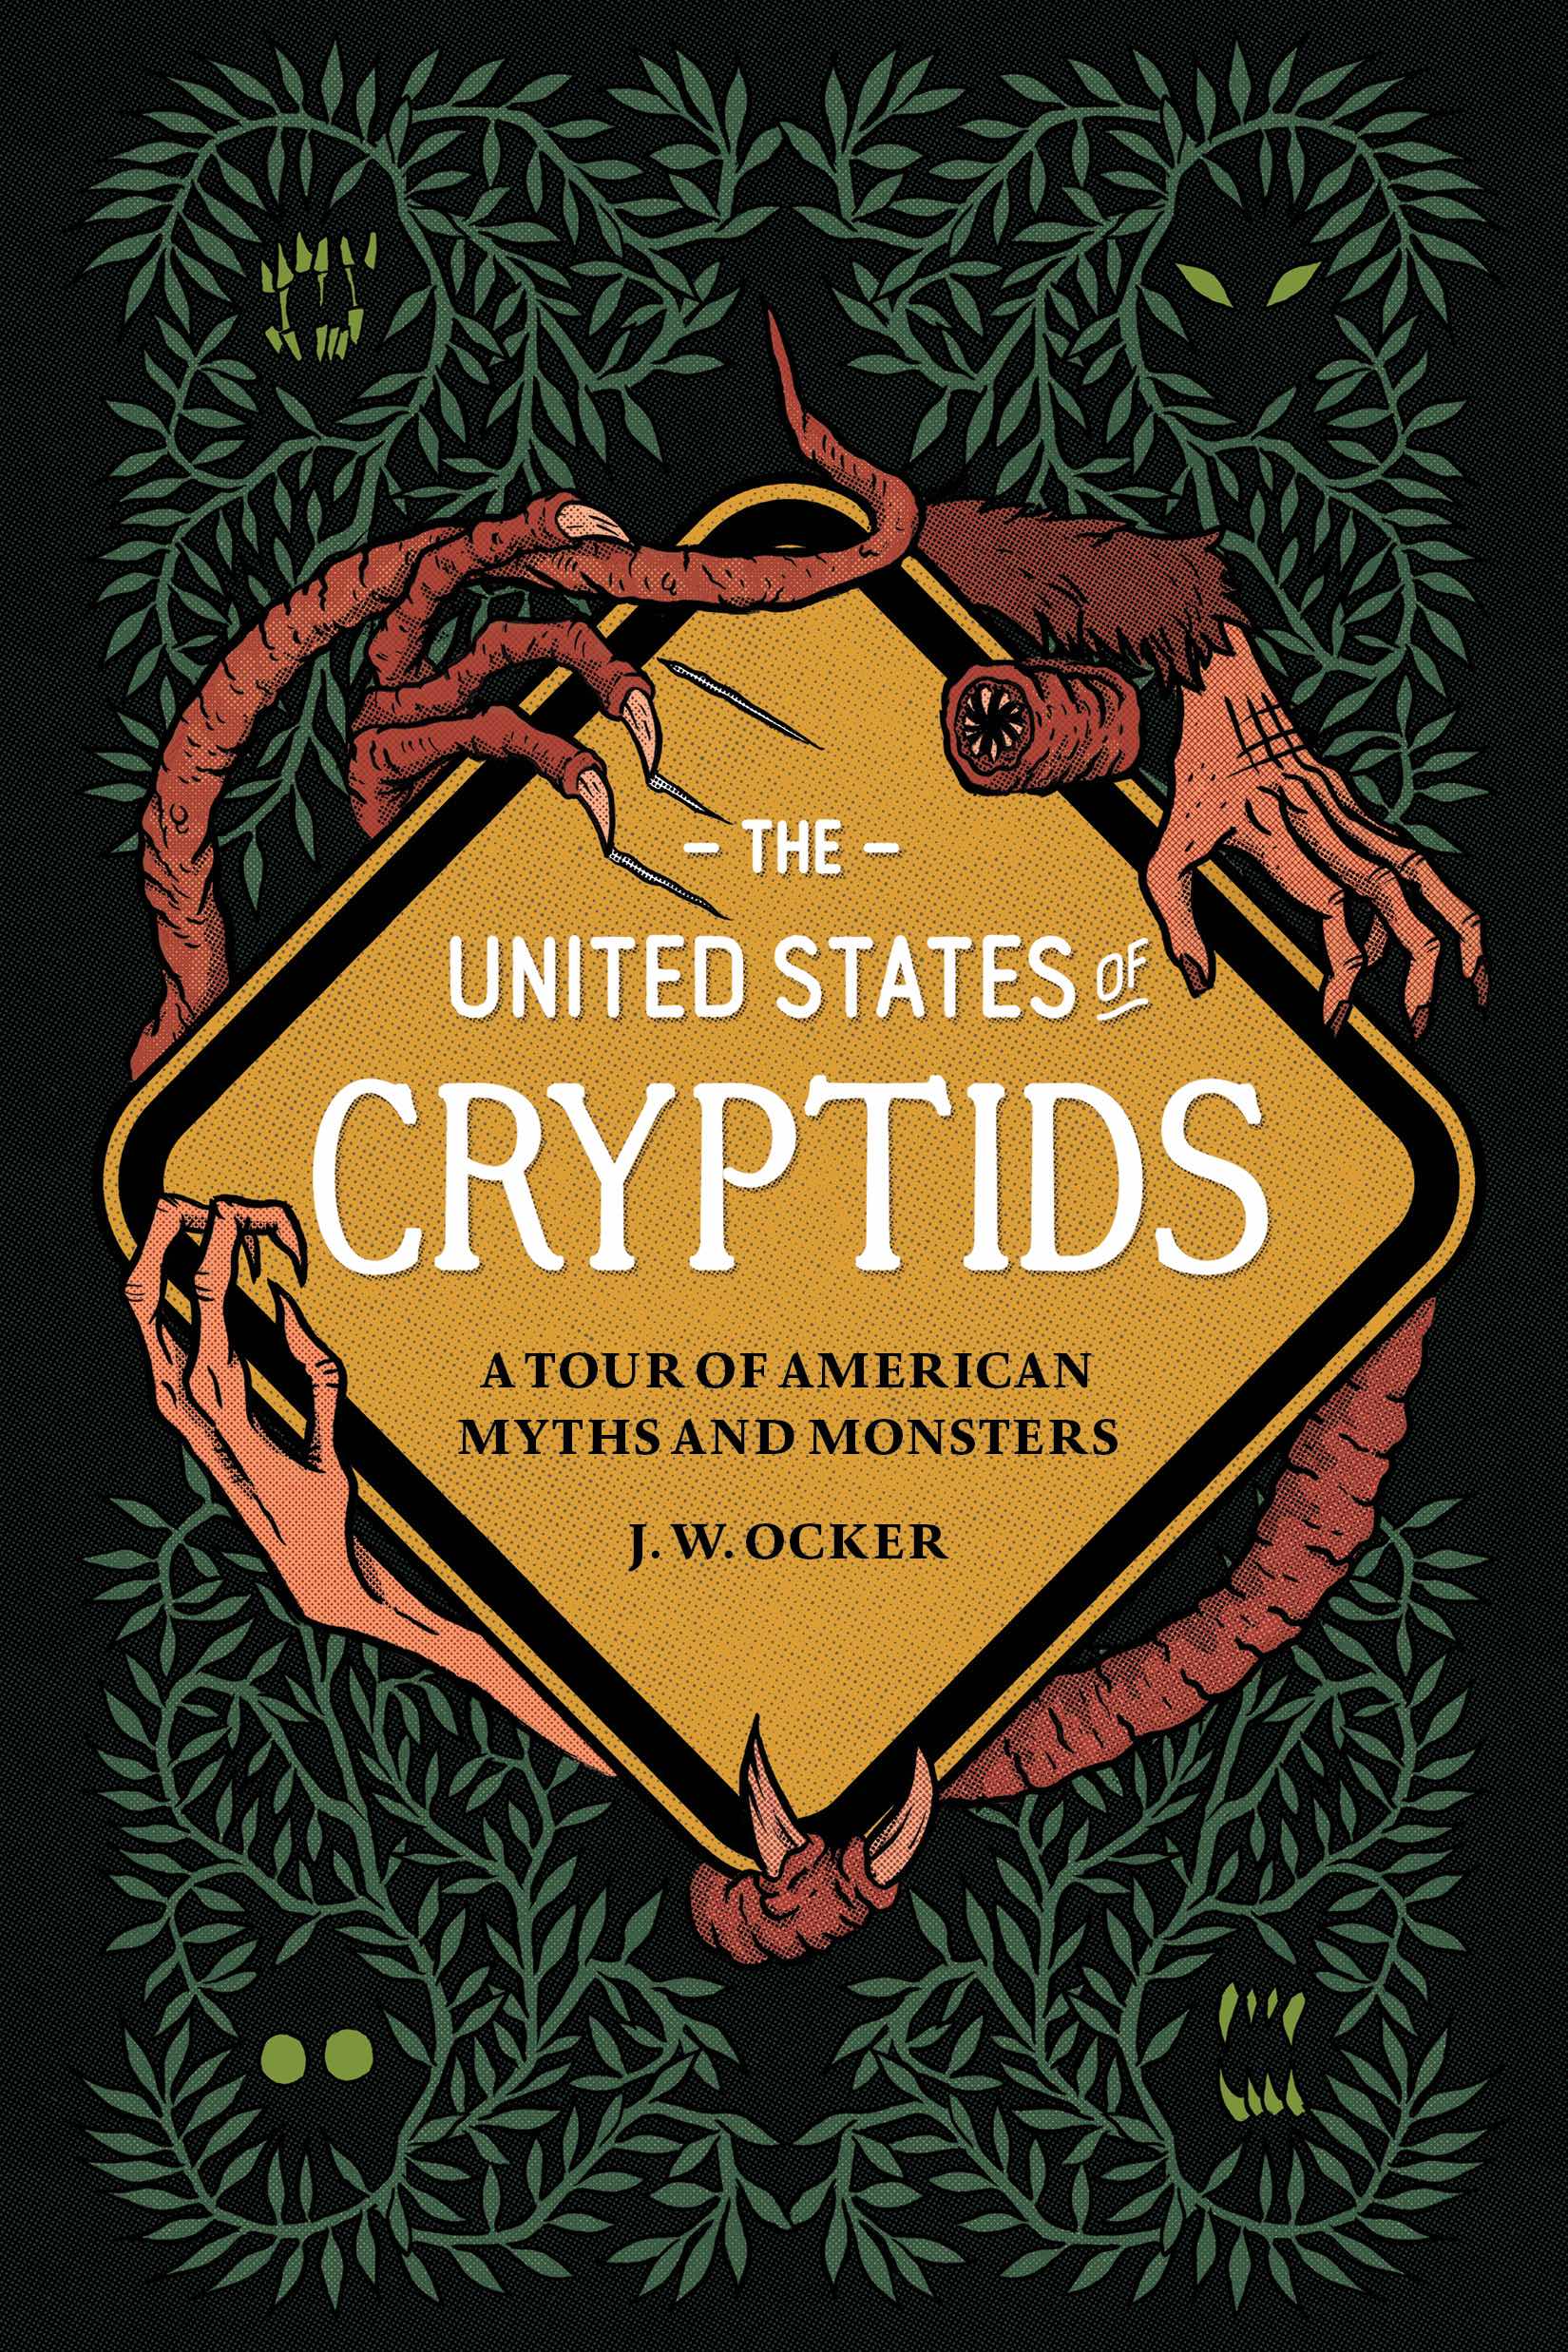 The United States of Cryptids Subtitle: A Tour of American Myths and Monsters